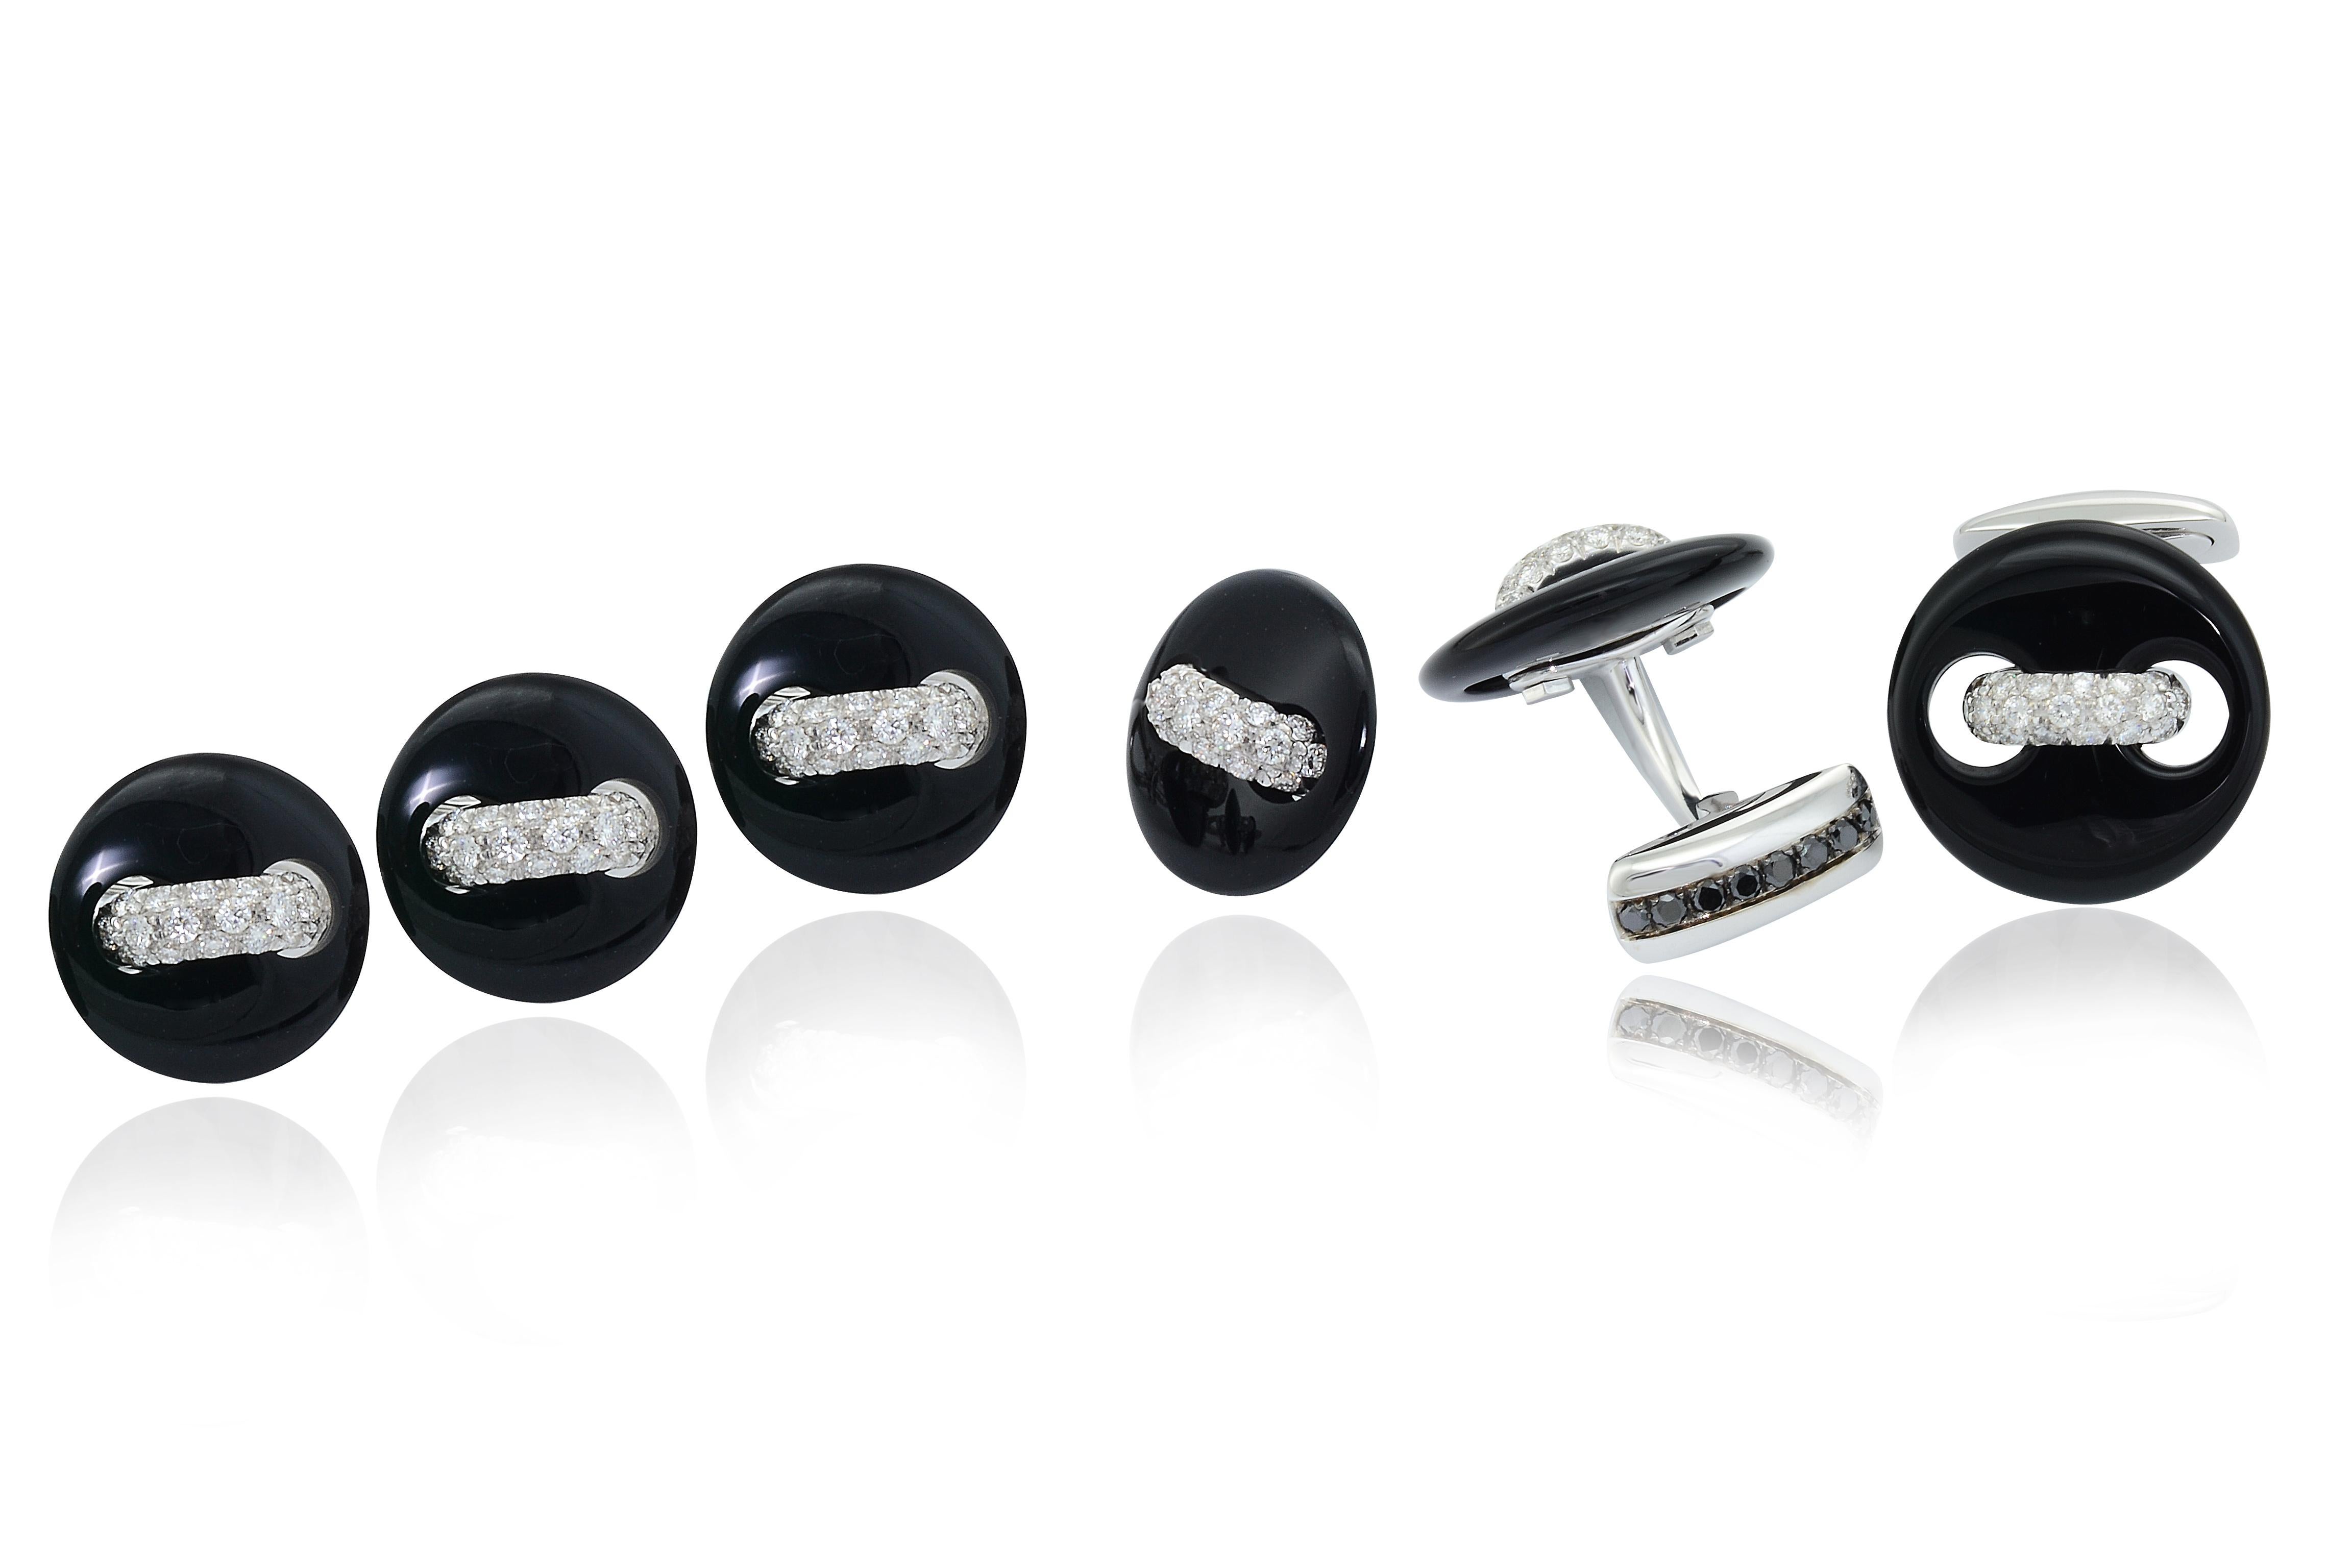 Original, unique and precious, the cufflinks are handcrafted in onyx, 18Kt white gold,  diamond pavè set and a line of black diamonds on the T bar. 

The cufflinks and eventually 4 matching studs will be delivered in 3 weeks time.
They will be